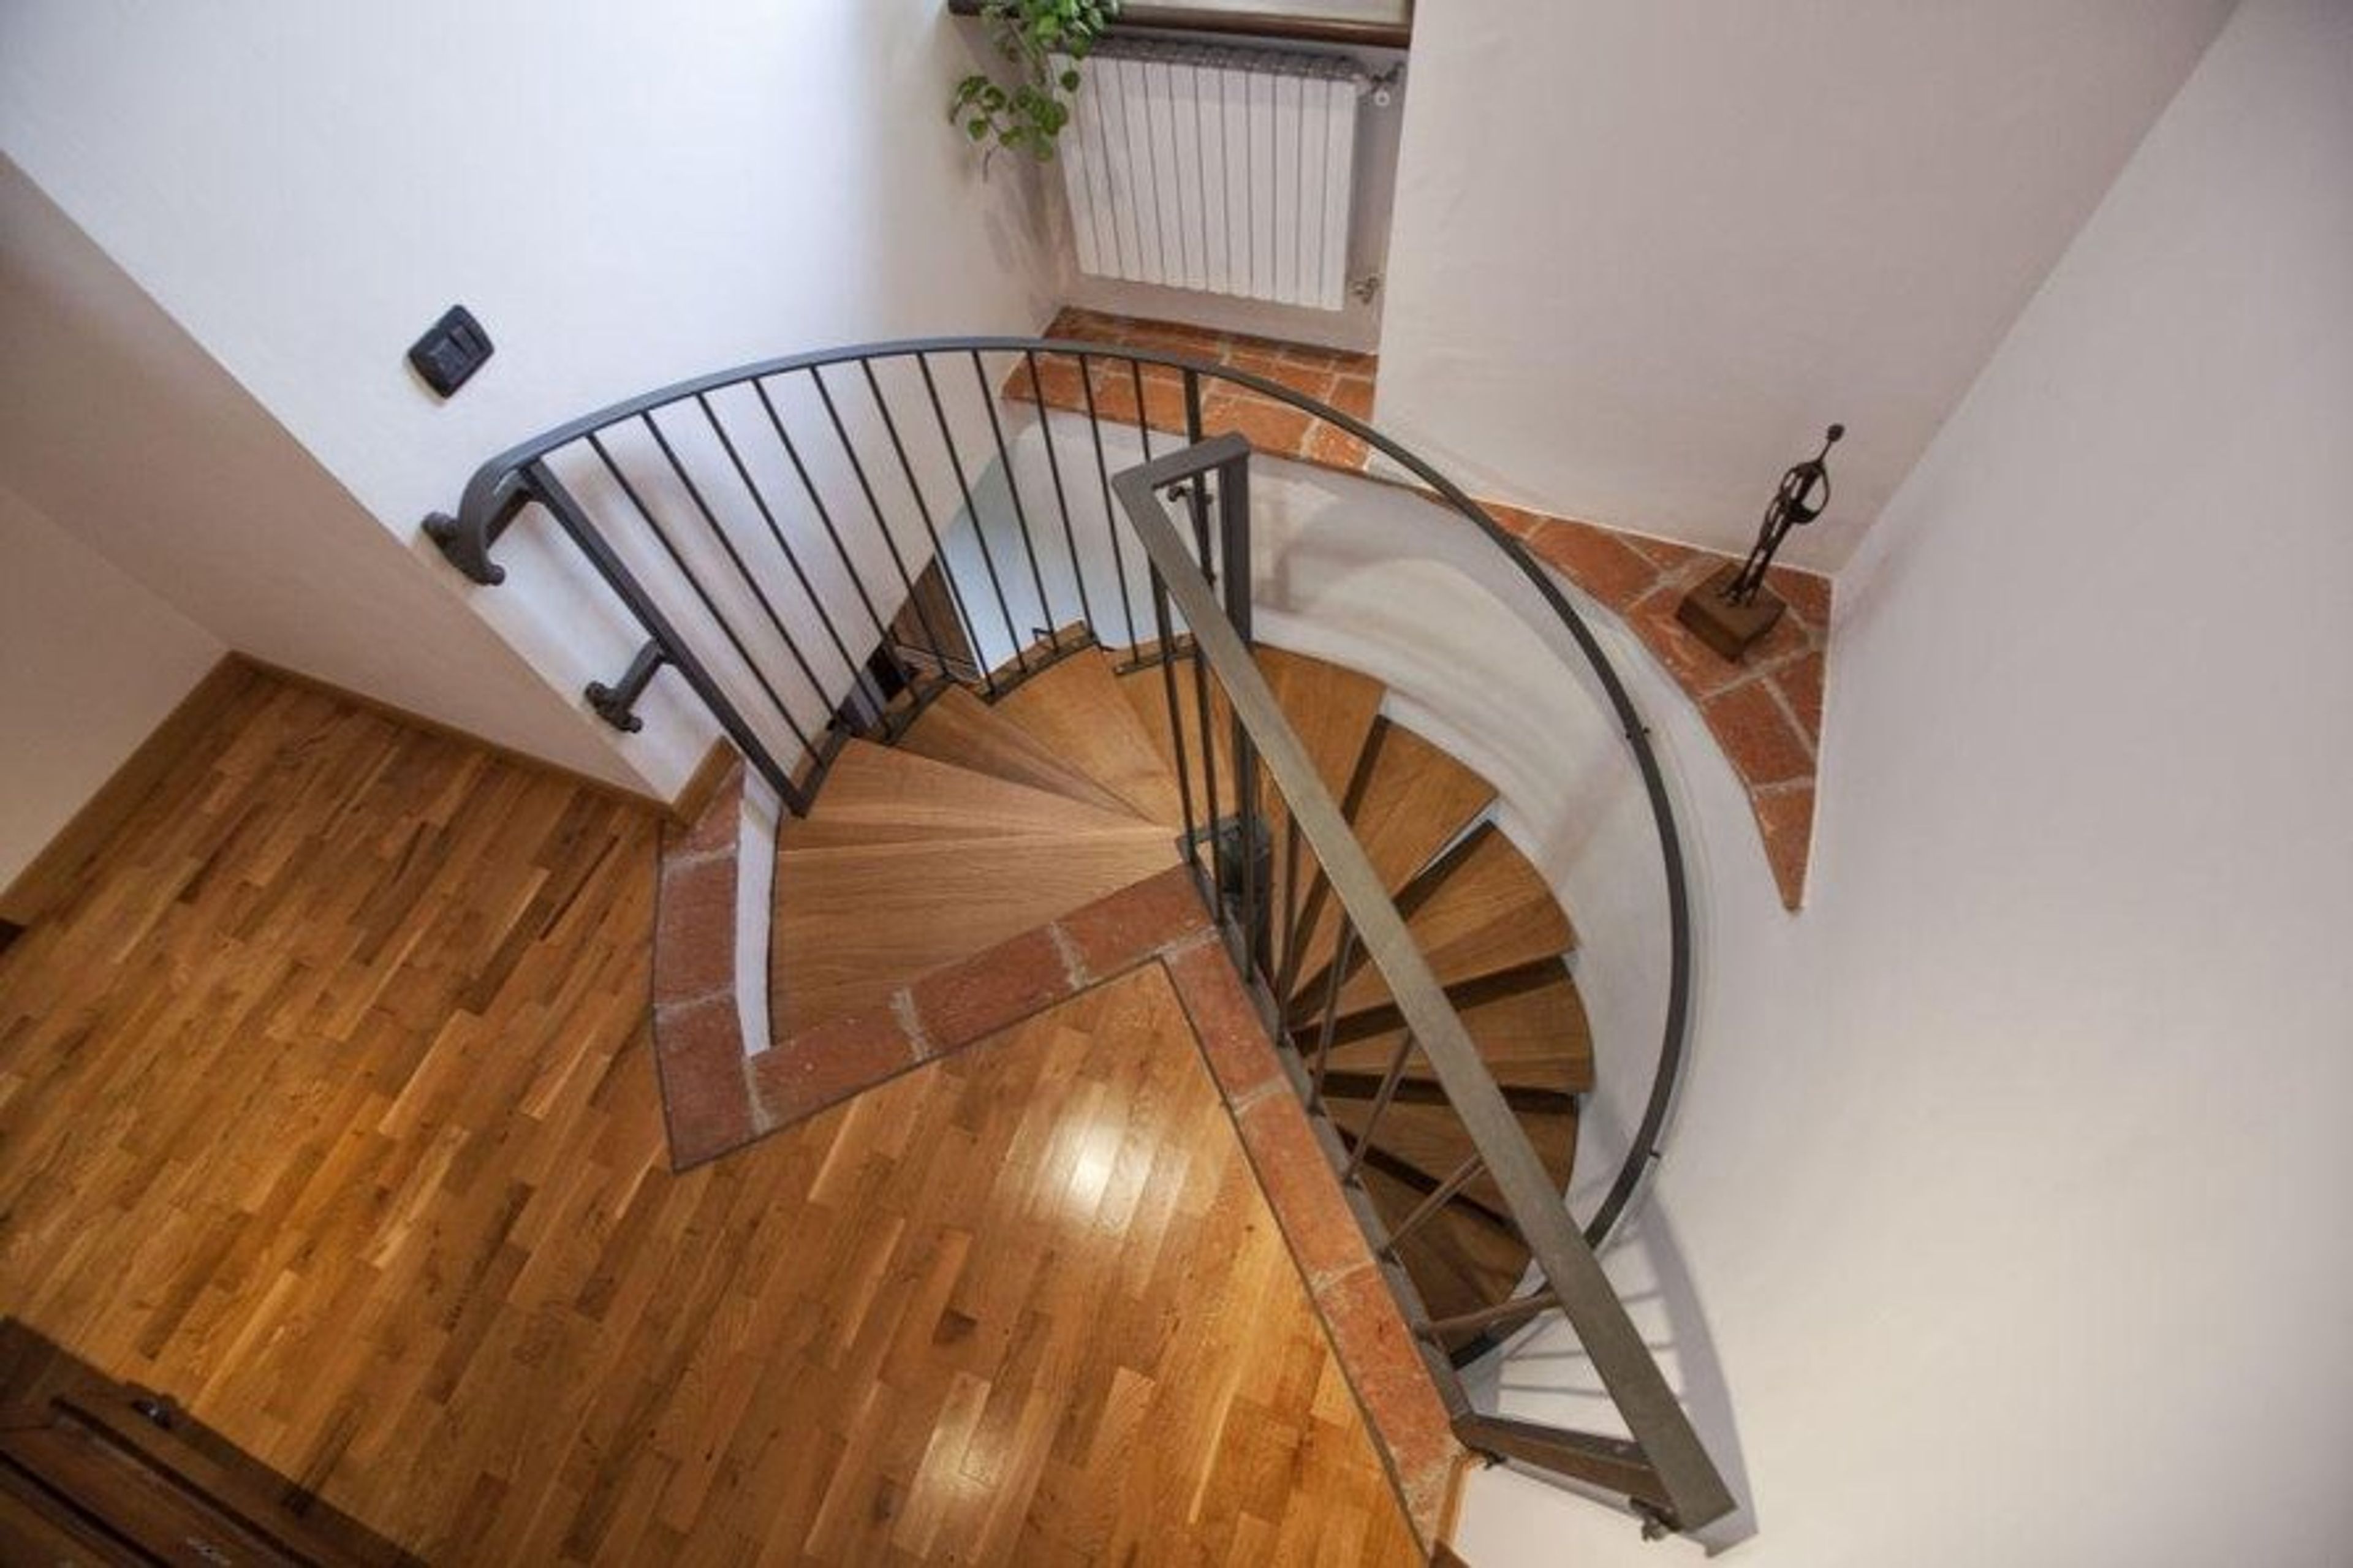 upstairs staircase
